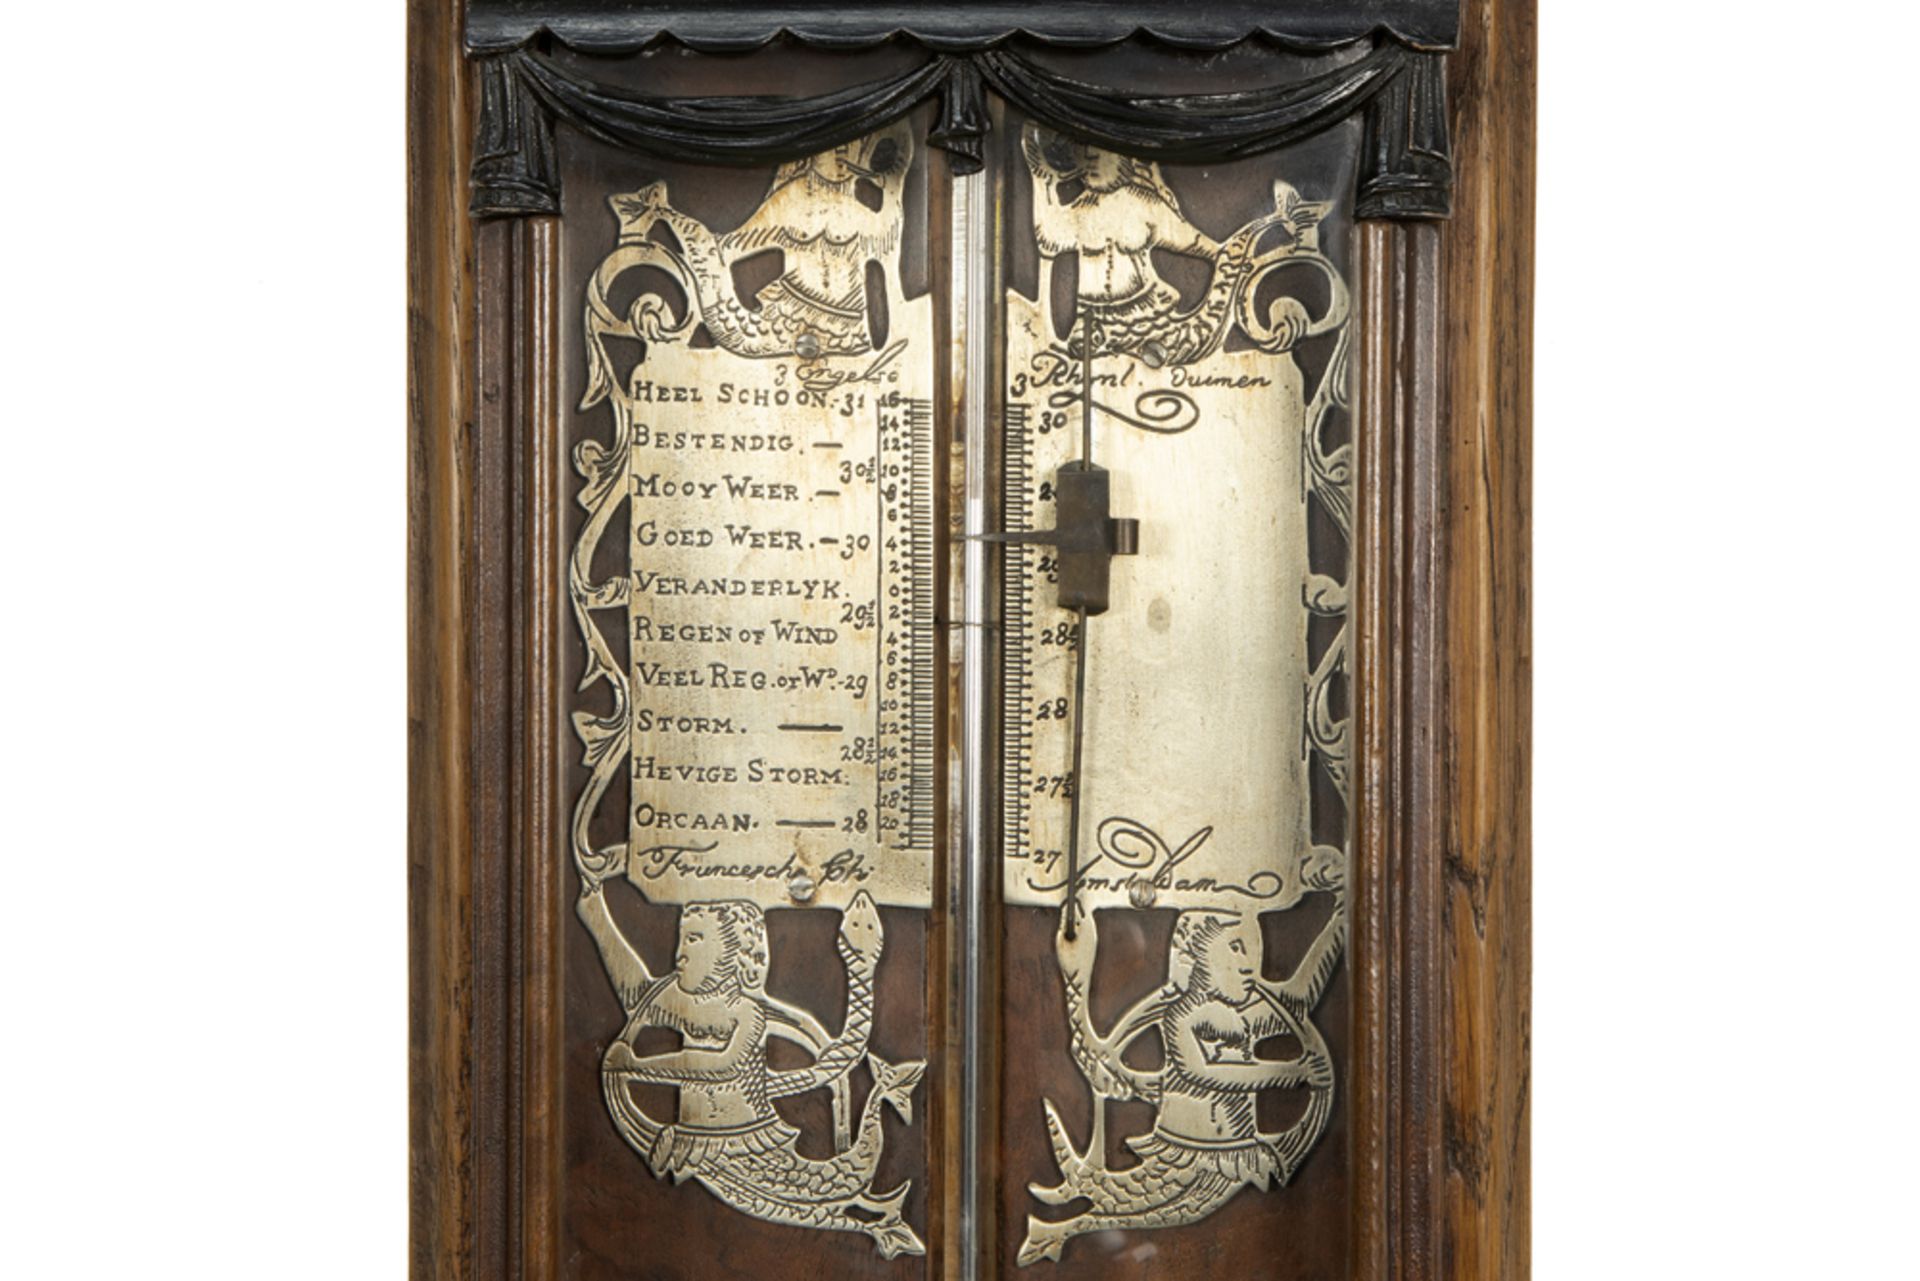 19th Cent. Dutch barometer with a case in burr of walnut, ebonized wood and walnut with Empire style - Image 2 of 3